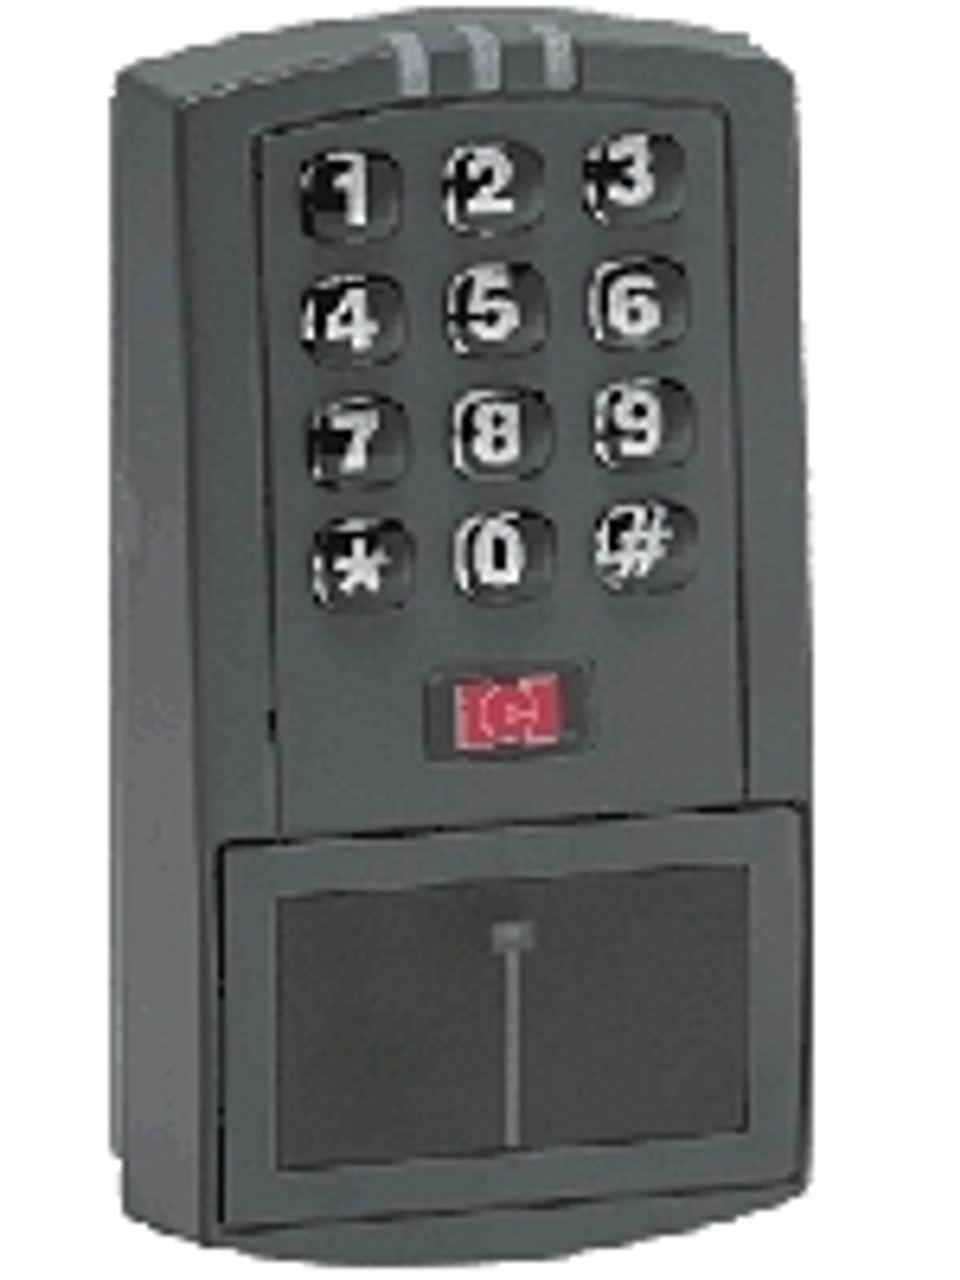 ProxPad Plus IEI Integrated Proximity Reader and Controller with Keypad